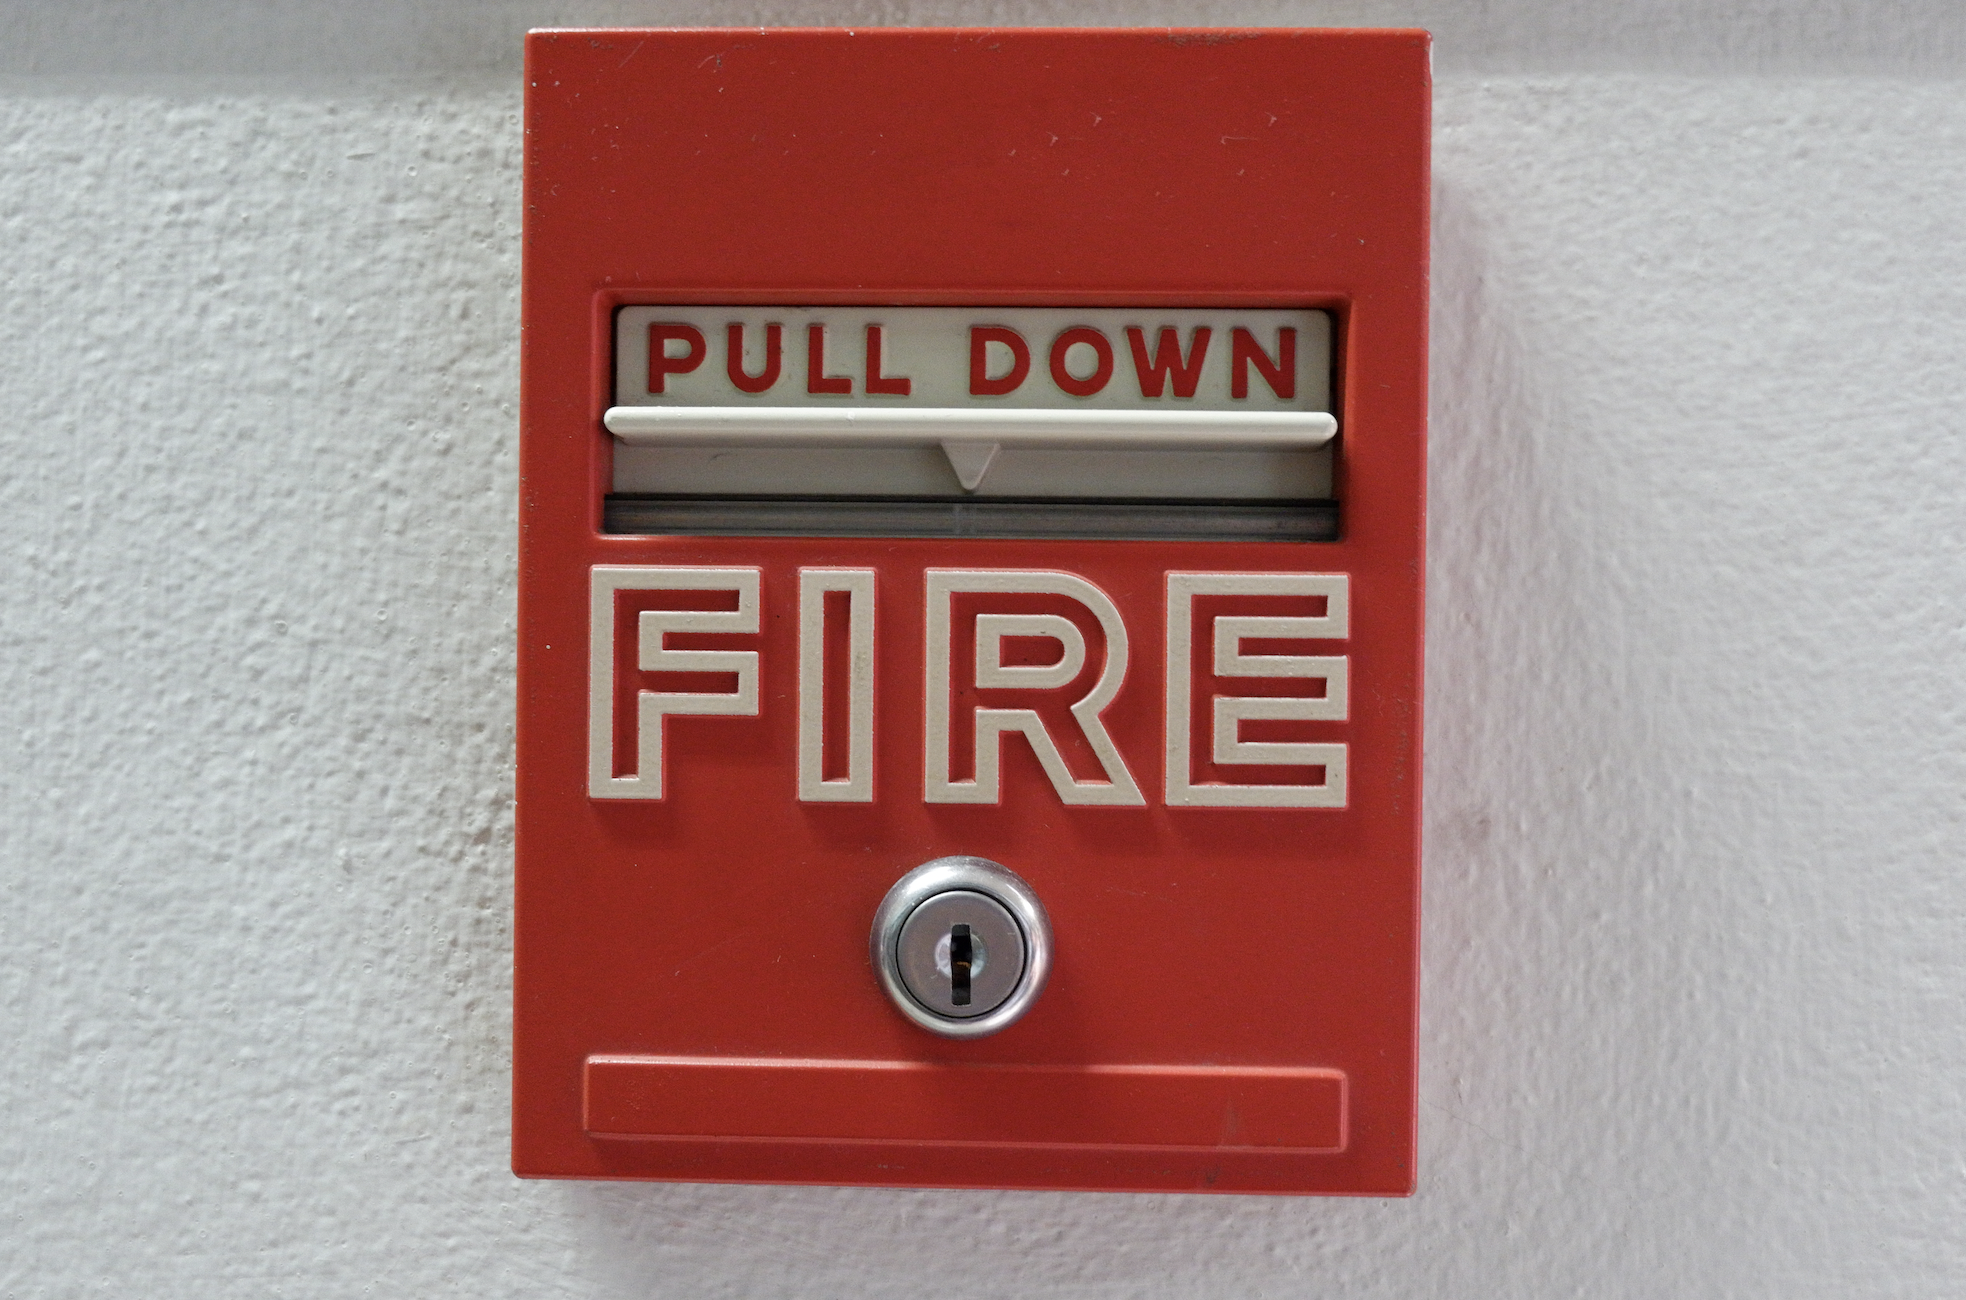 Image of a Fire Alarm